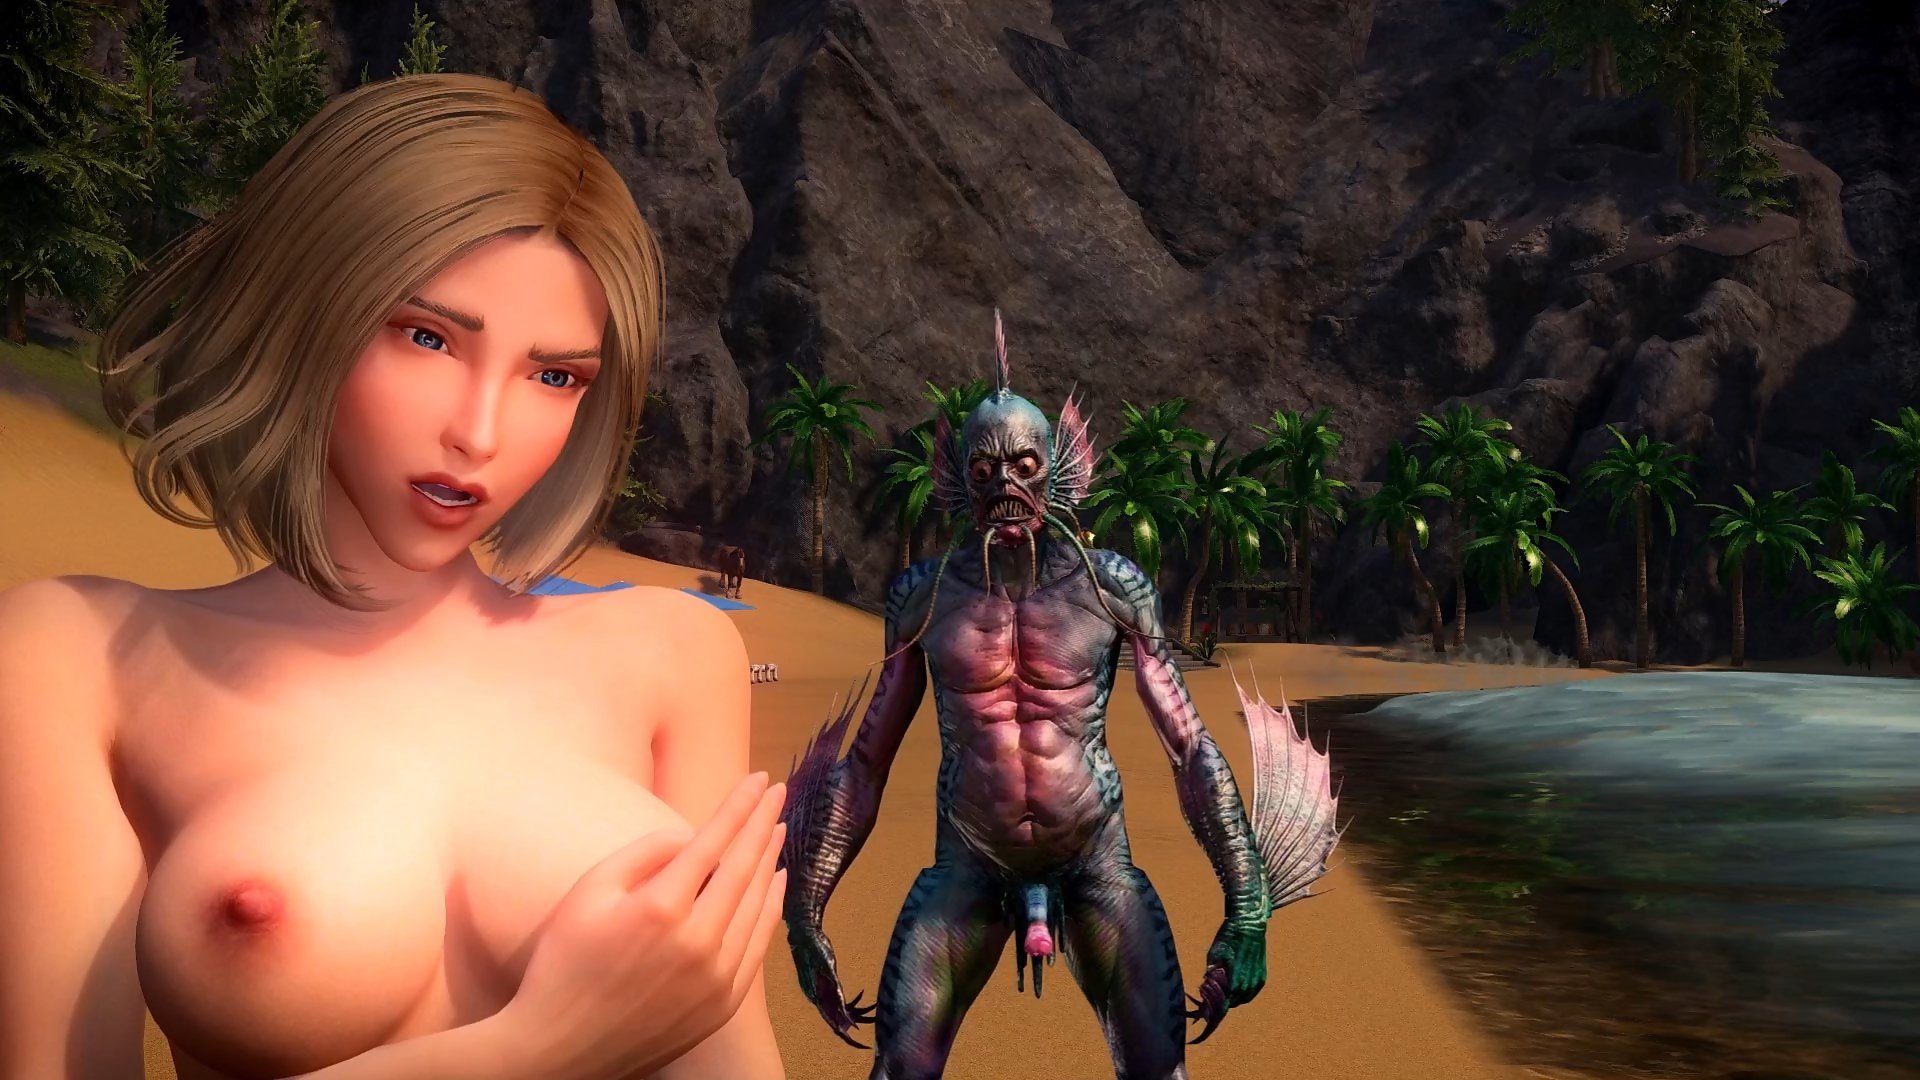 It came from the Sea - Deep Ones attack hot blonde in 3d monster porn  threesome - Hentai City